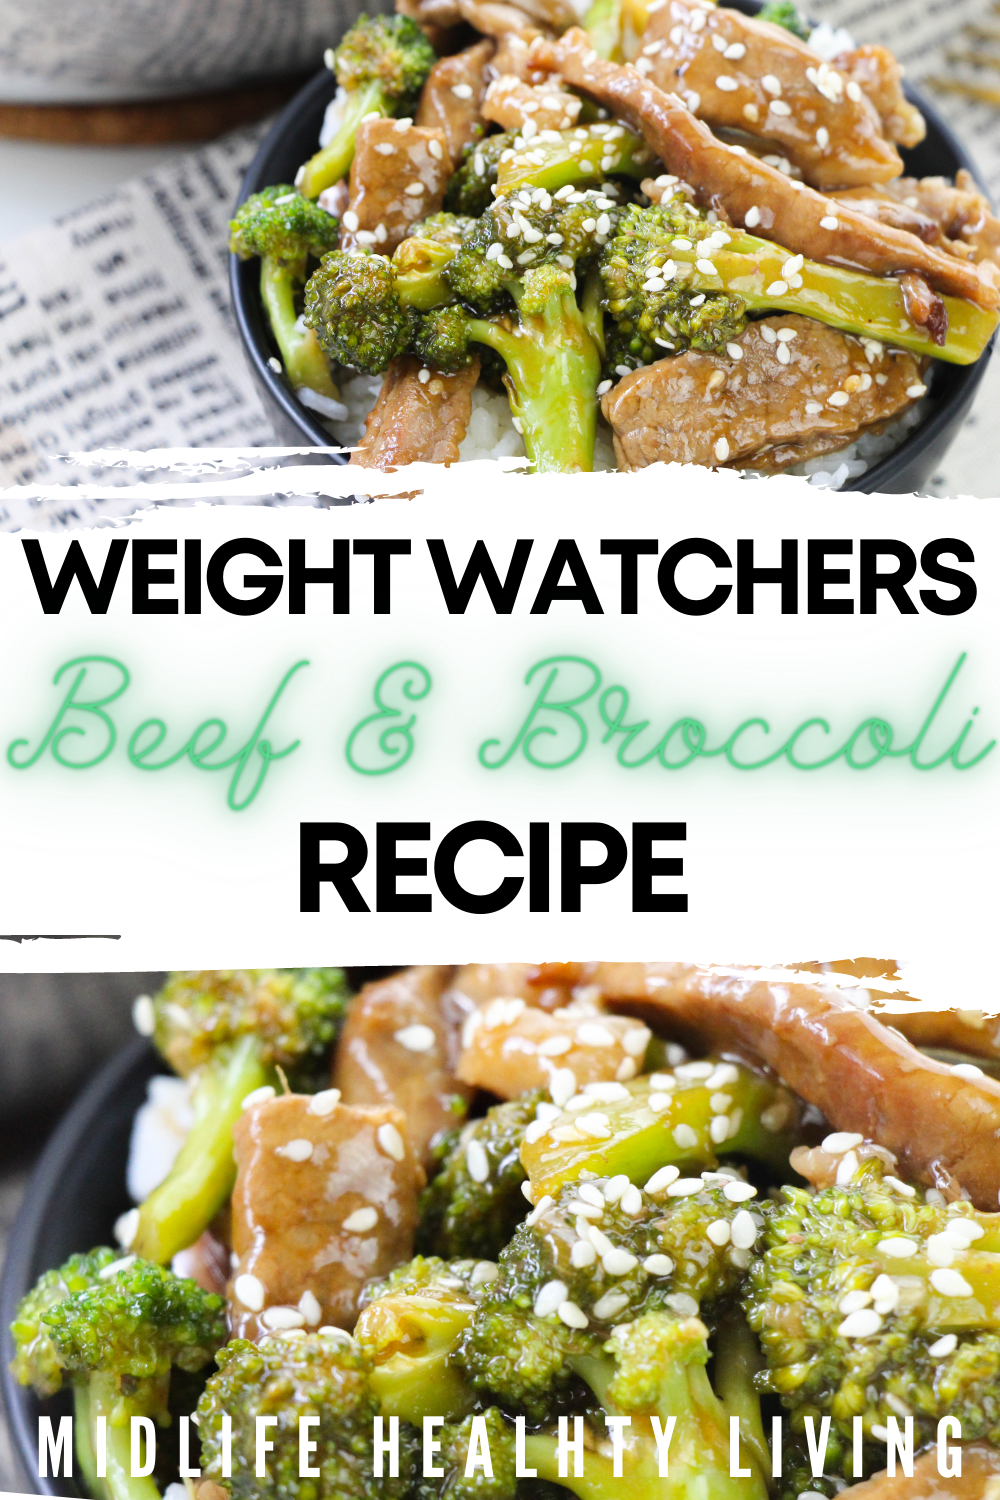 Weight Watchers Beef and Broccoli Recipe